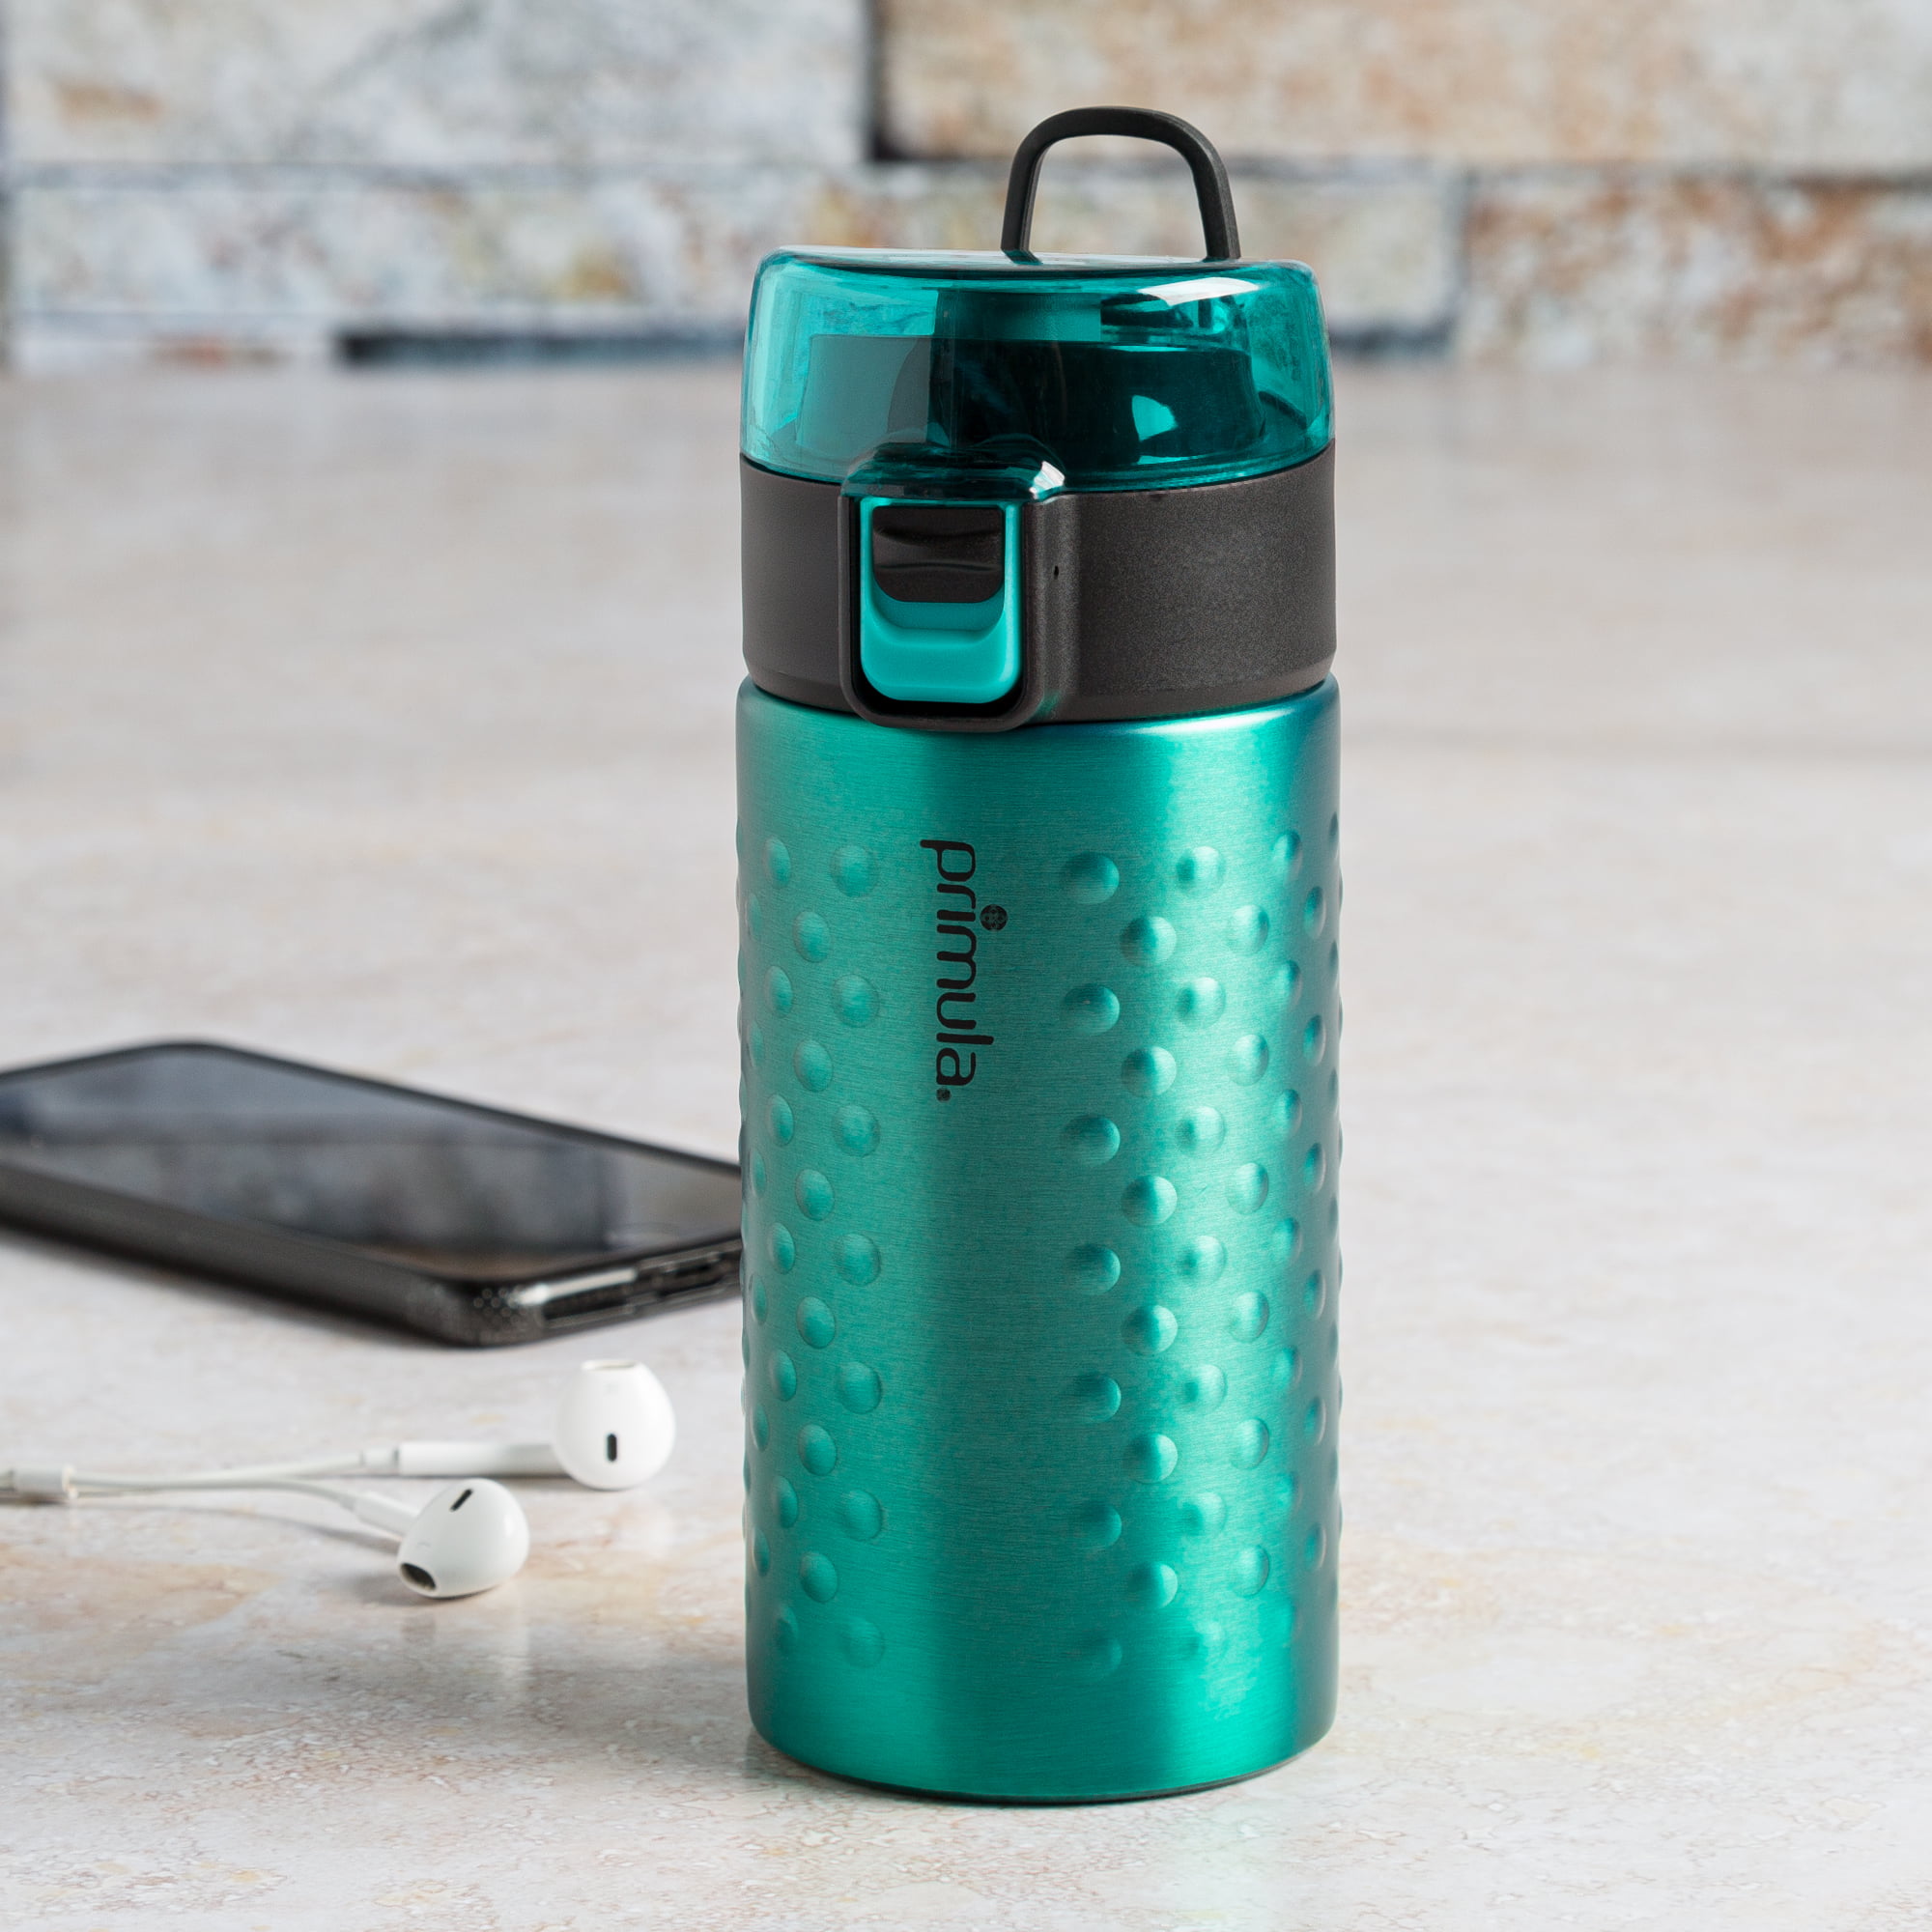 Primula Commuter 16 Oz. Insulated Mug With Multifunction Lid, Travel Mugs, Sports & Outdoors